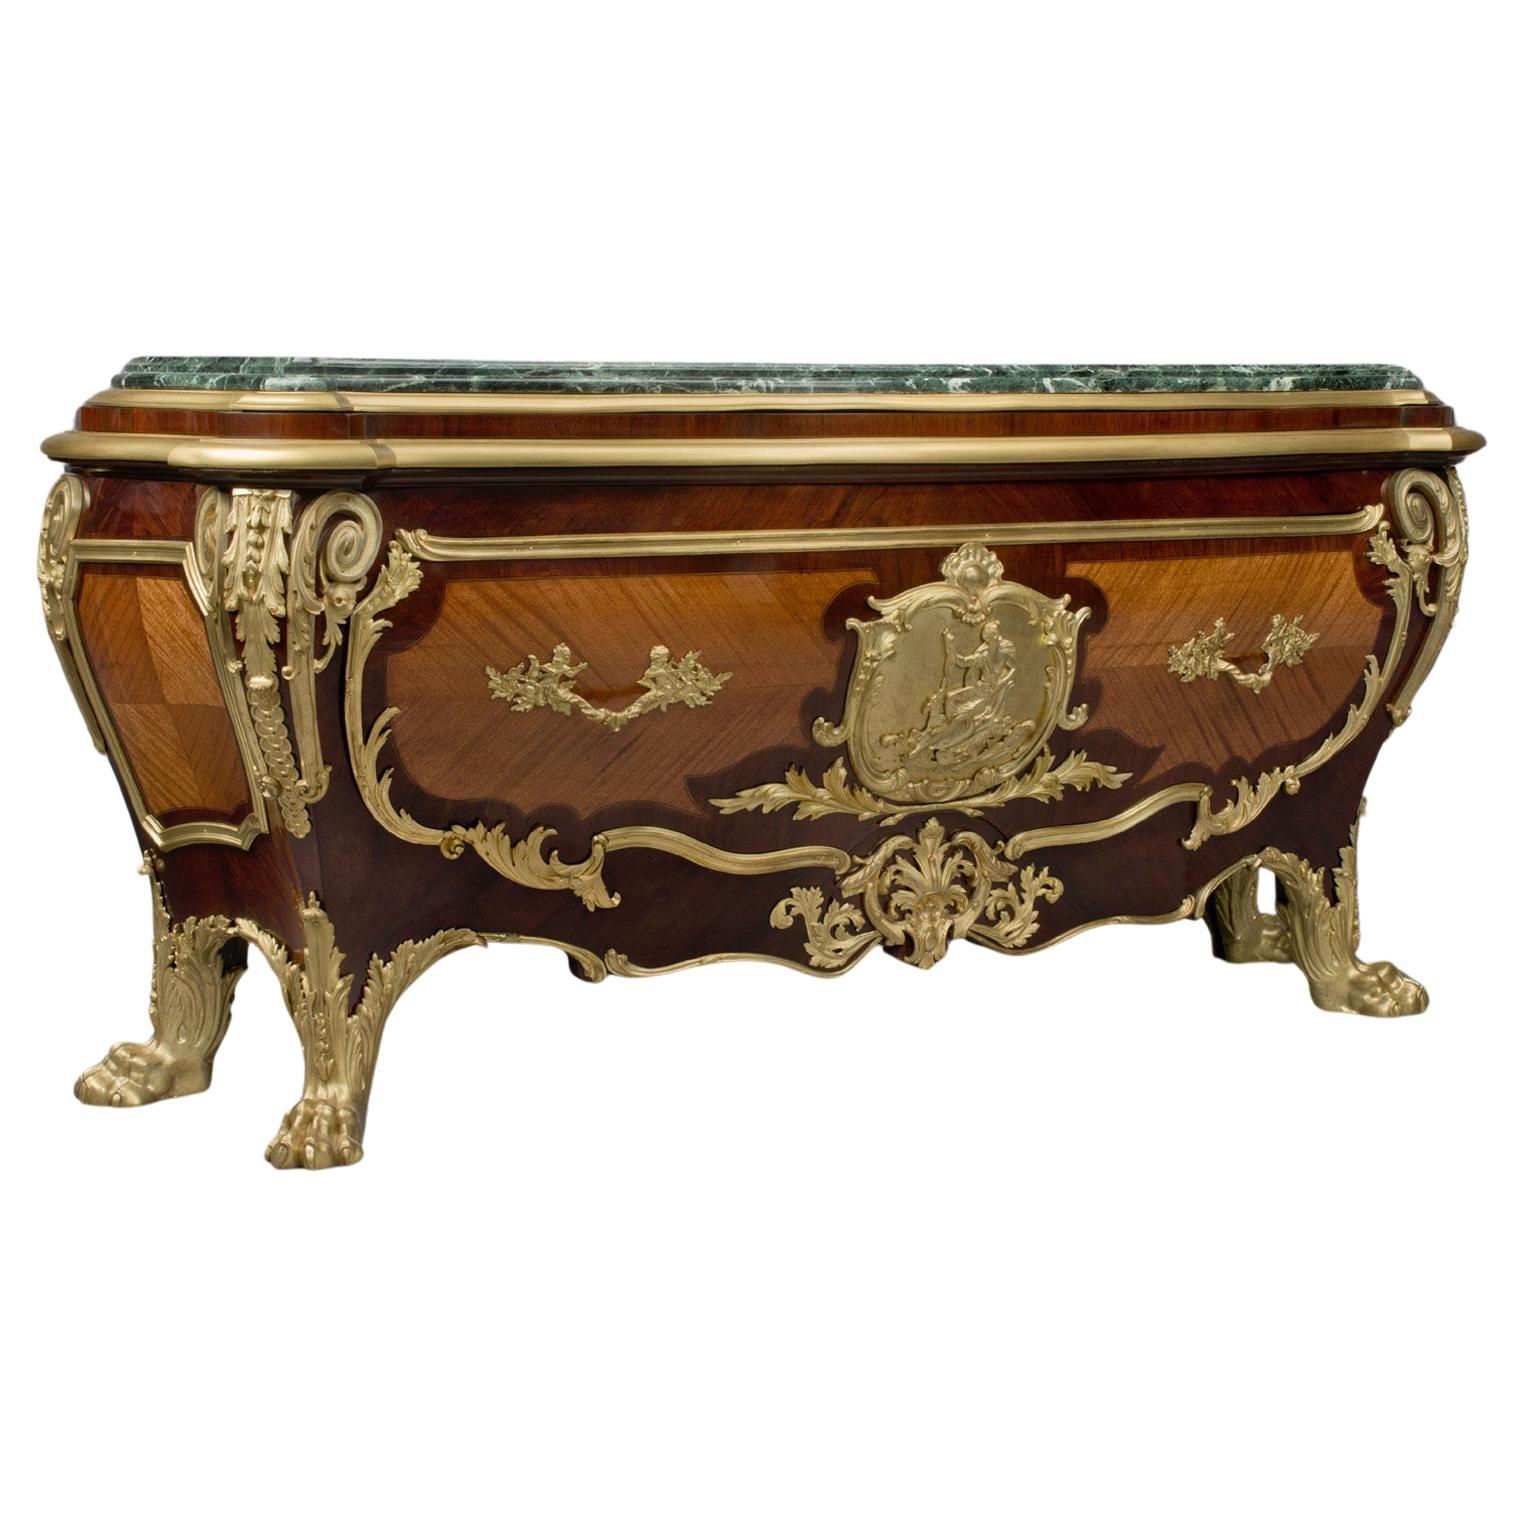 A Mahogany Grande Commode en Tombeau, after the Model by Cressent For Sale